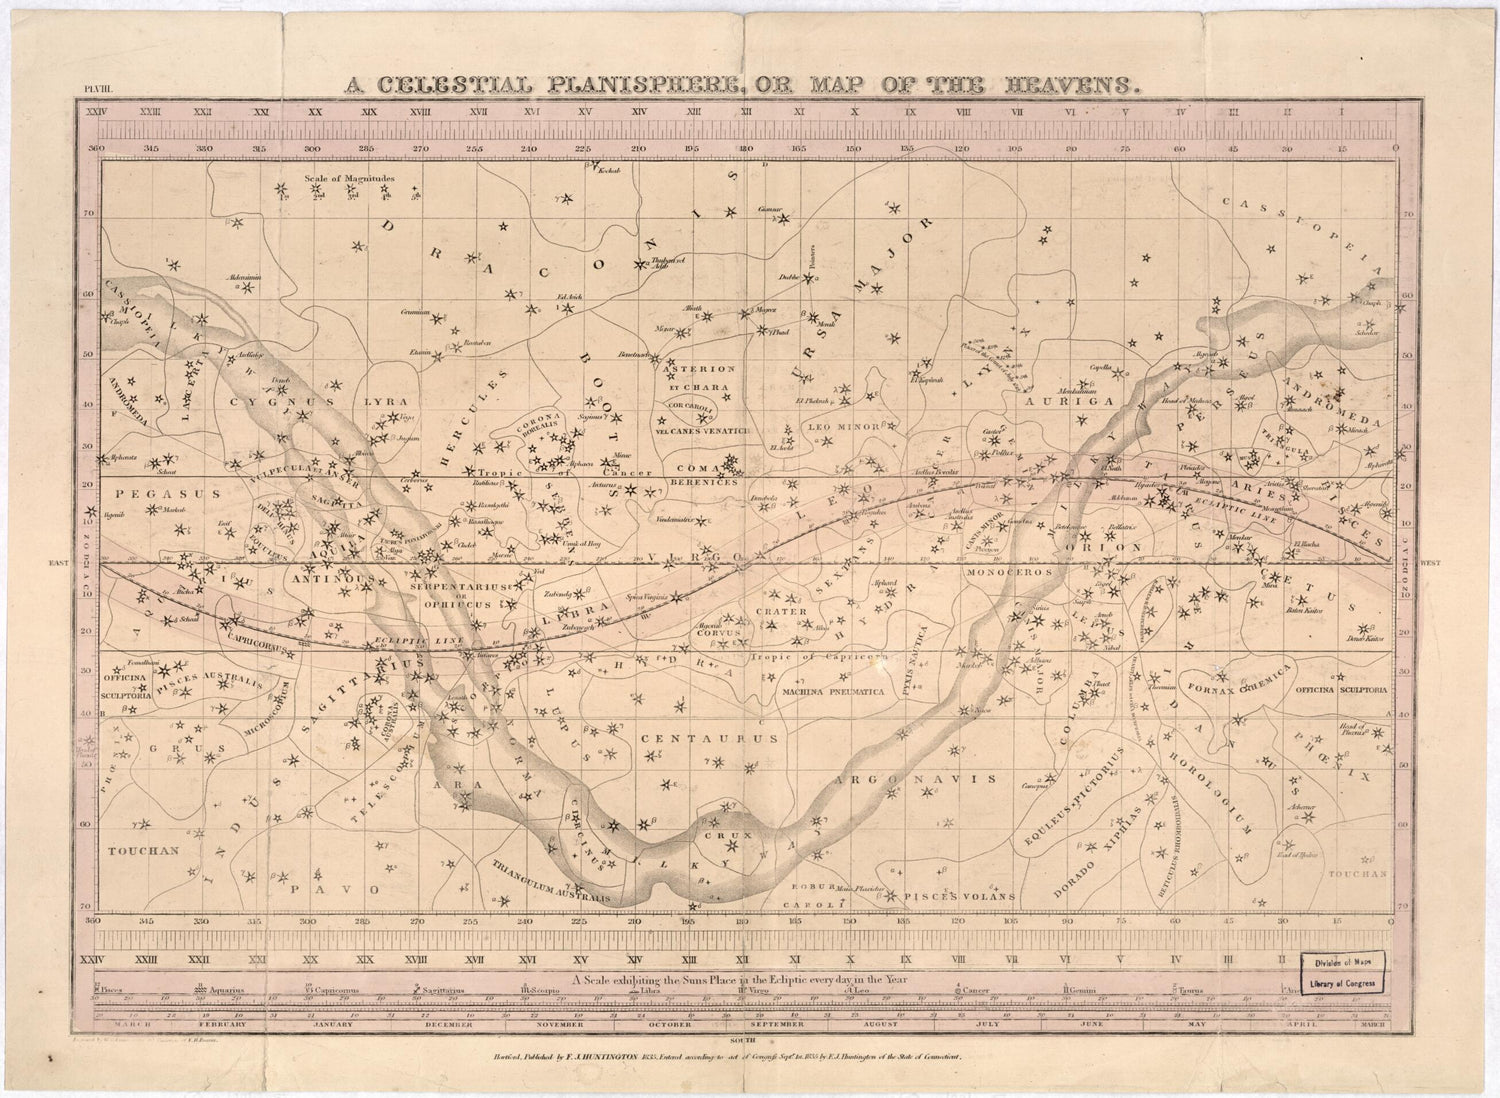 This old map of A Celestial Planisphere, Or Map of the Heavens from 1835 was created by Elijah H. (Elijah Hinsdale) Burritt, William Gardner Evans, Francis Junius Huntington in 1835